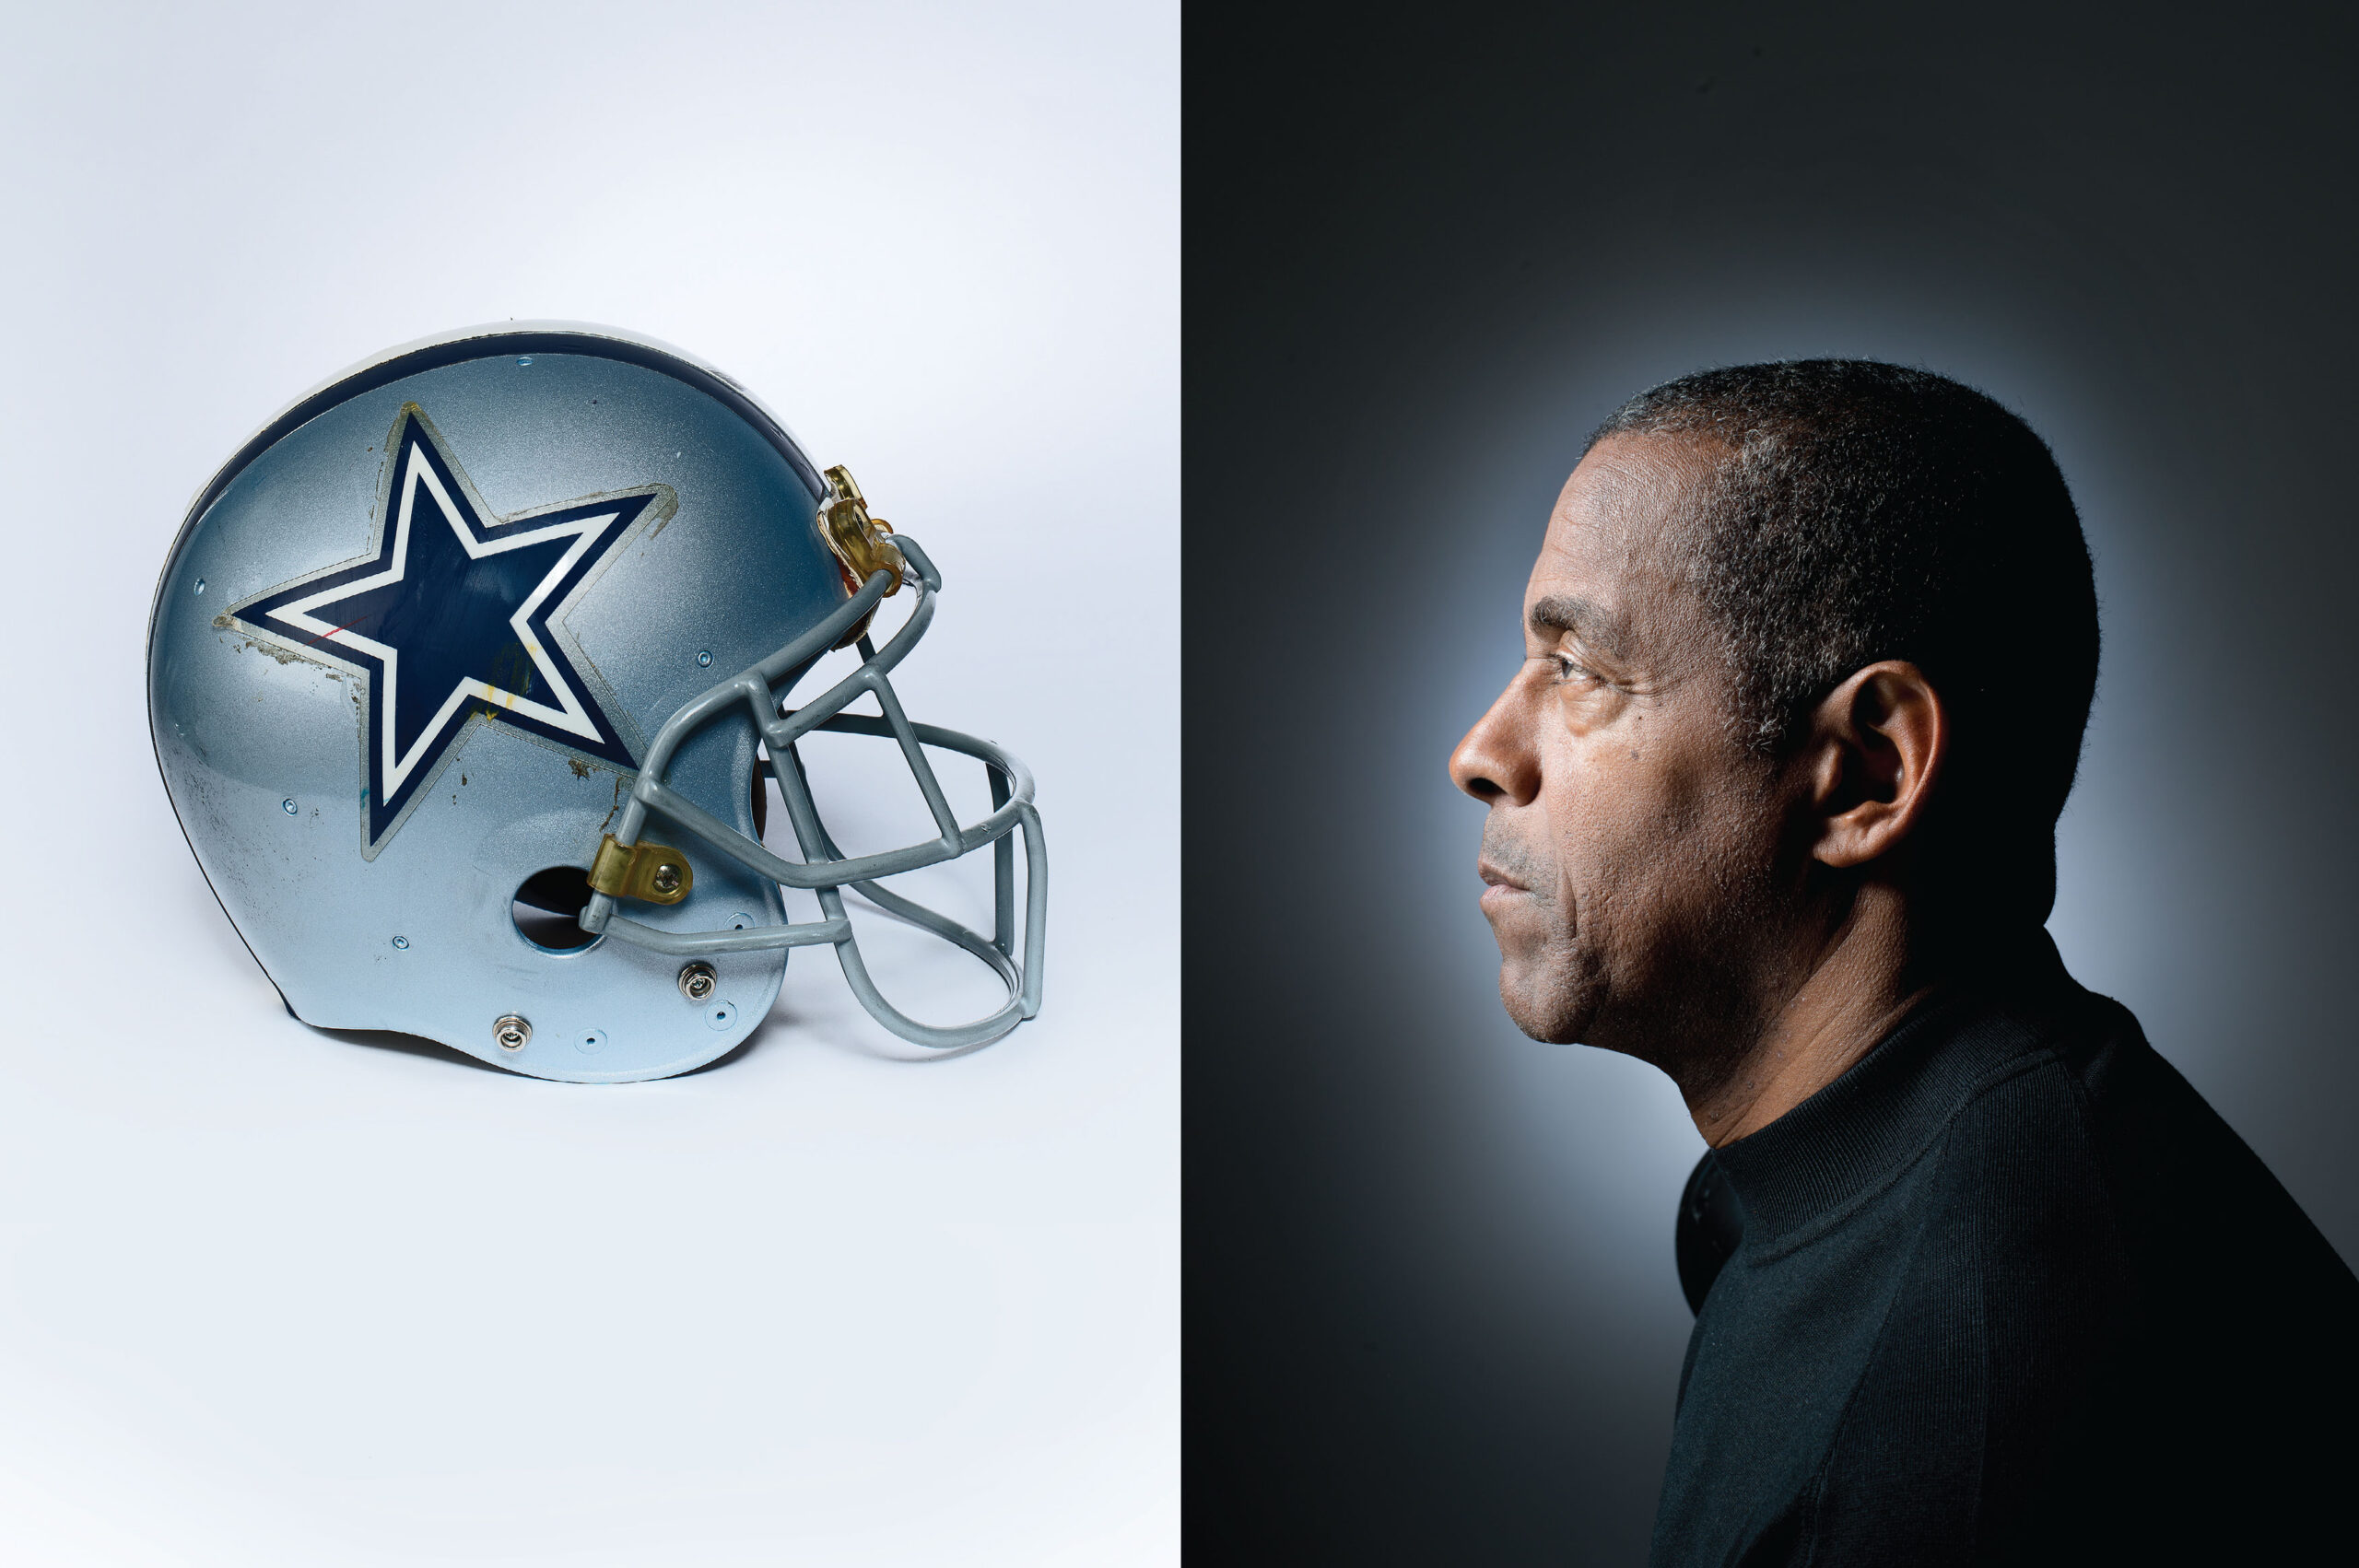 COLLISION COURSE: Dorsett, photographed in his home December 19, 2013, faces his old, battle-scarred helmet. From "Tony Dorsett Is Losing His Mind," February 2014.